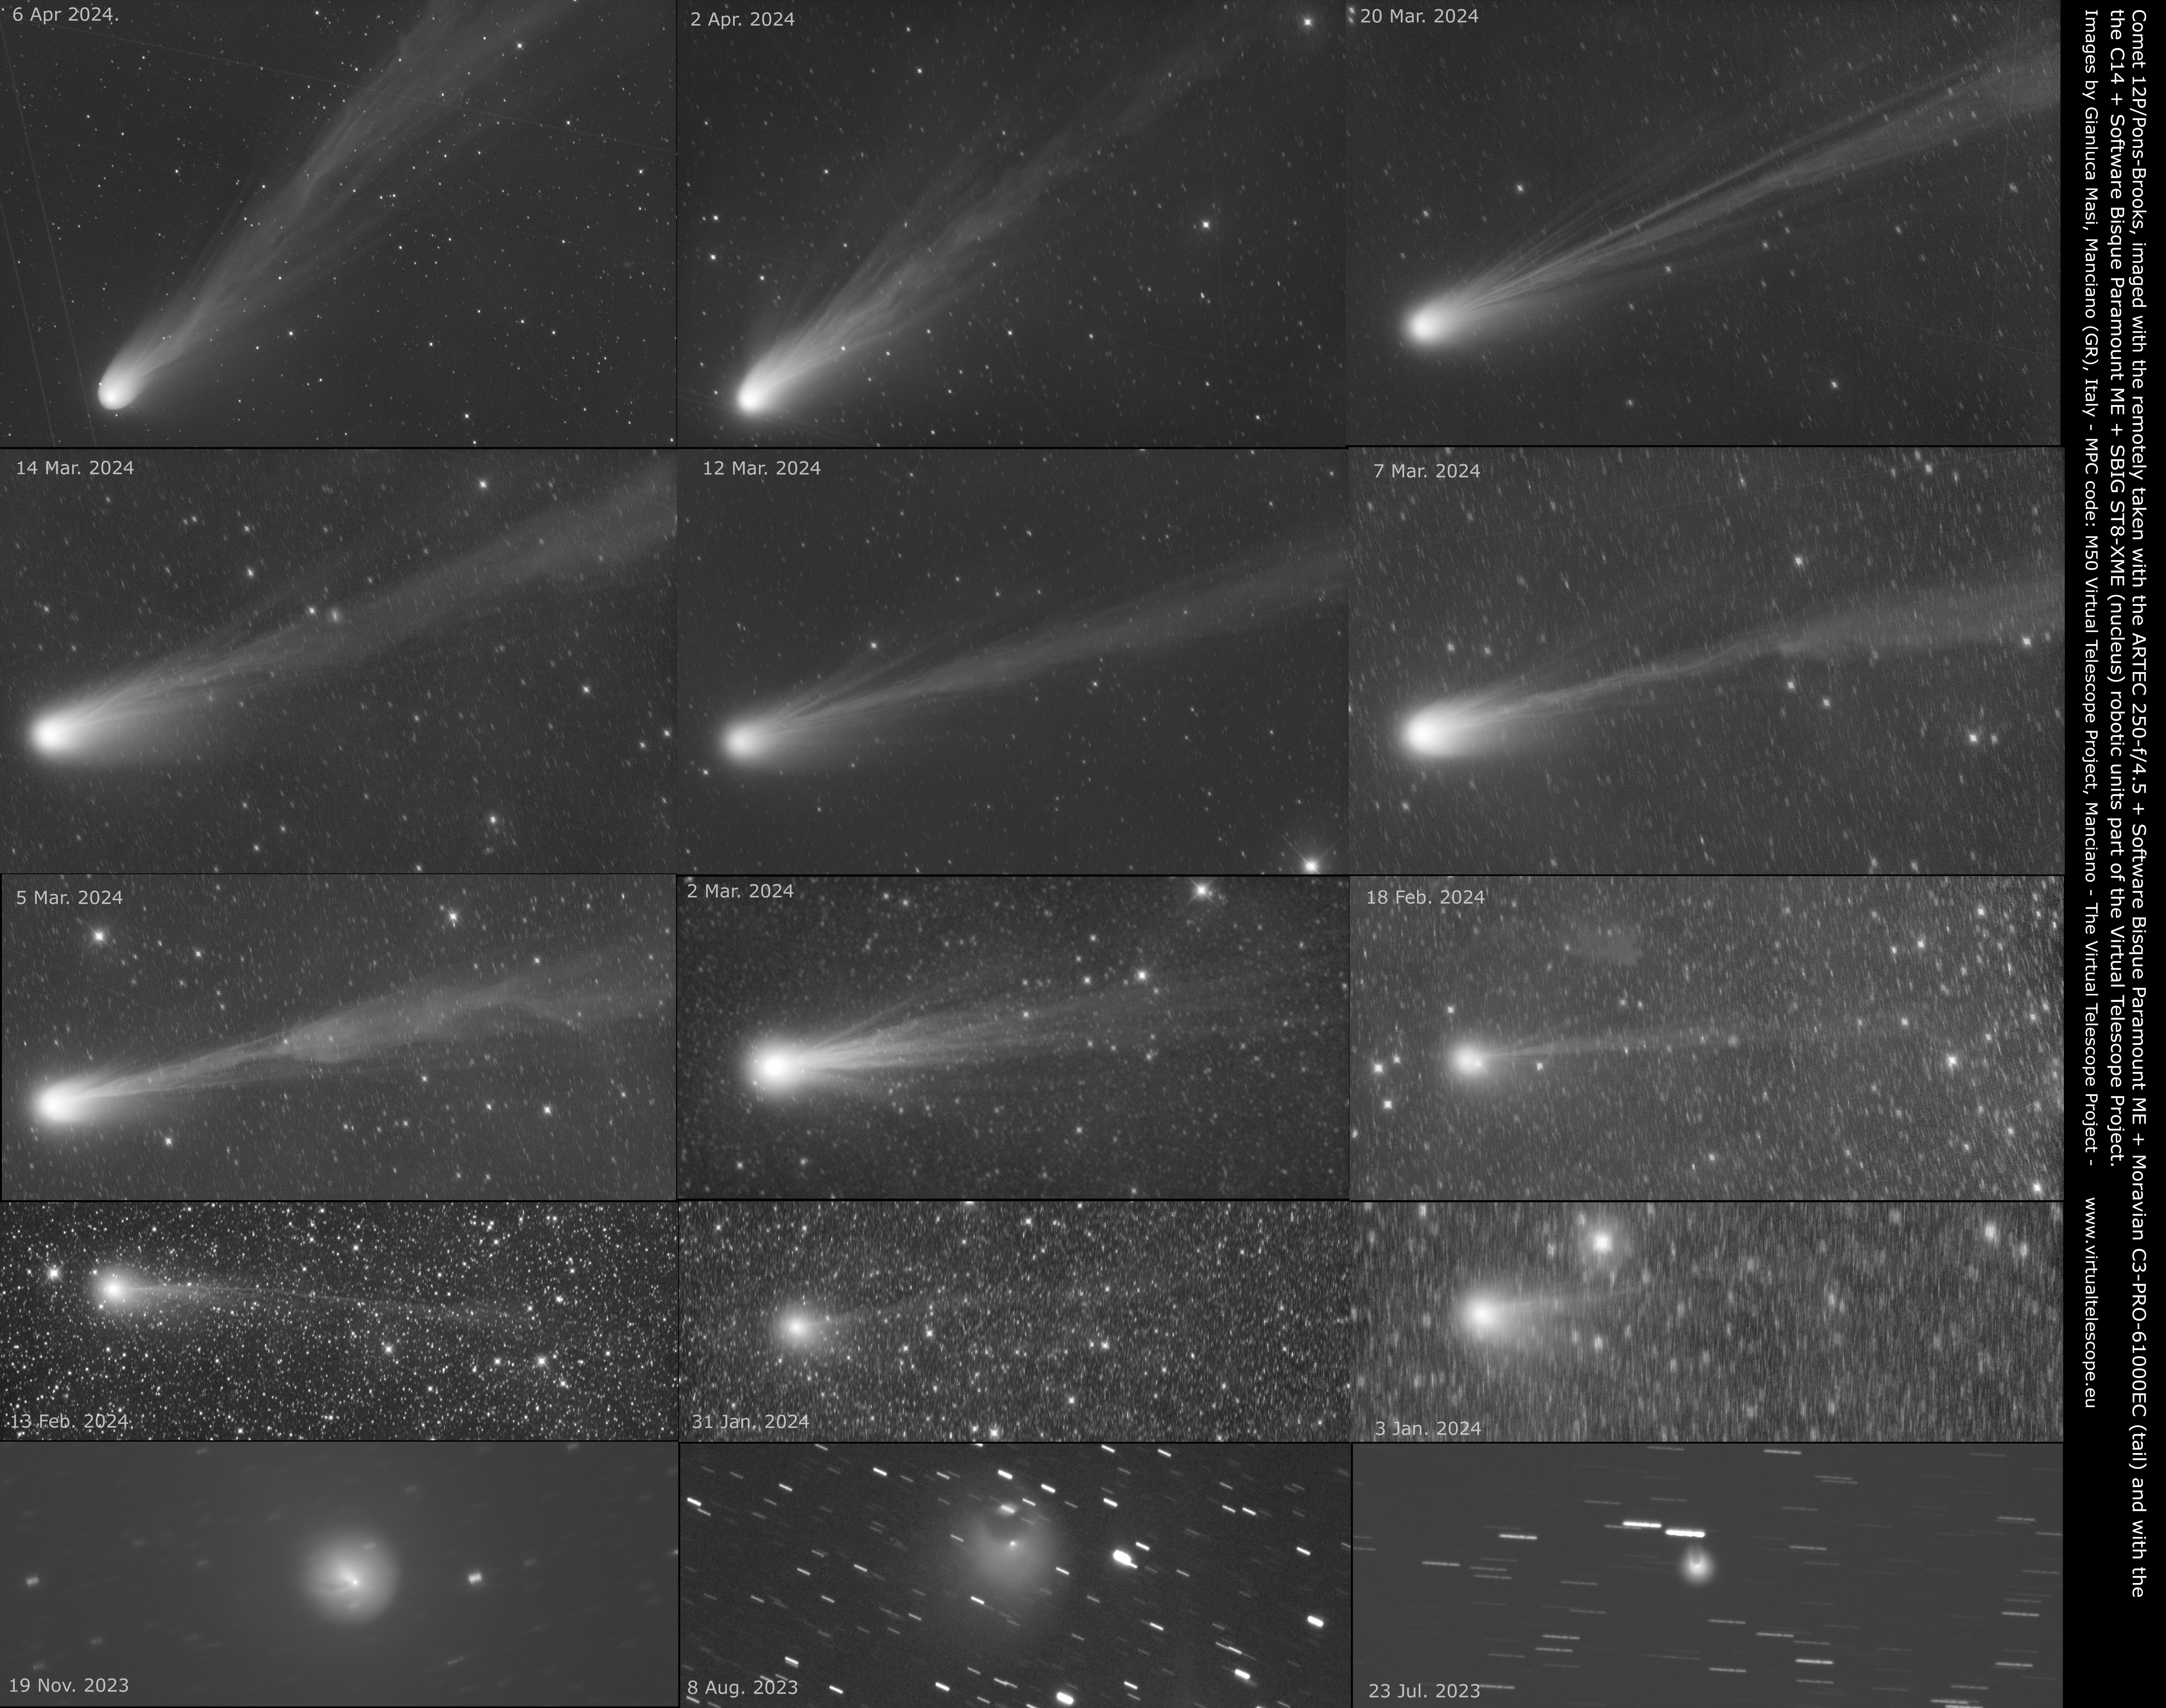 a series of 16 images showing a fuzzy tail growing in size behind a bright white dot among background stars